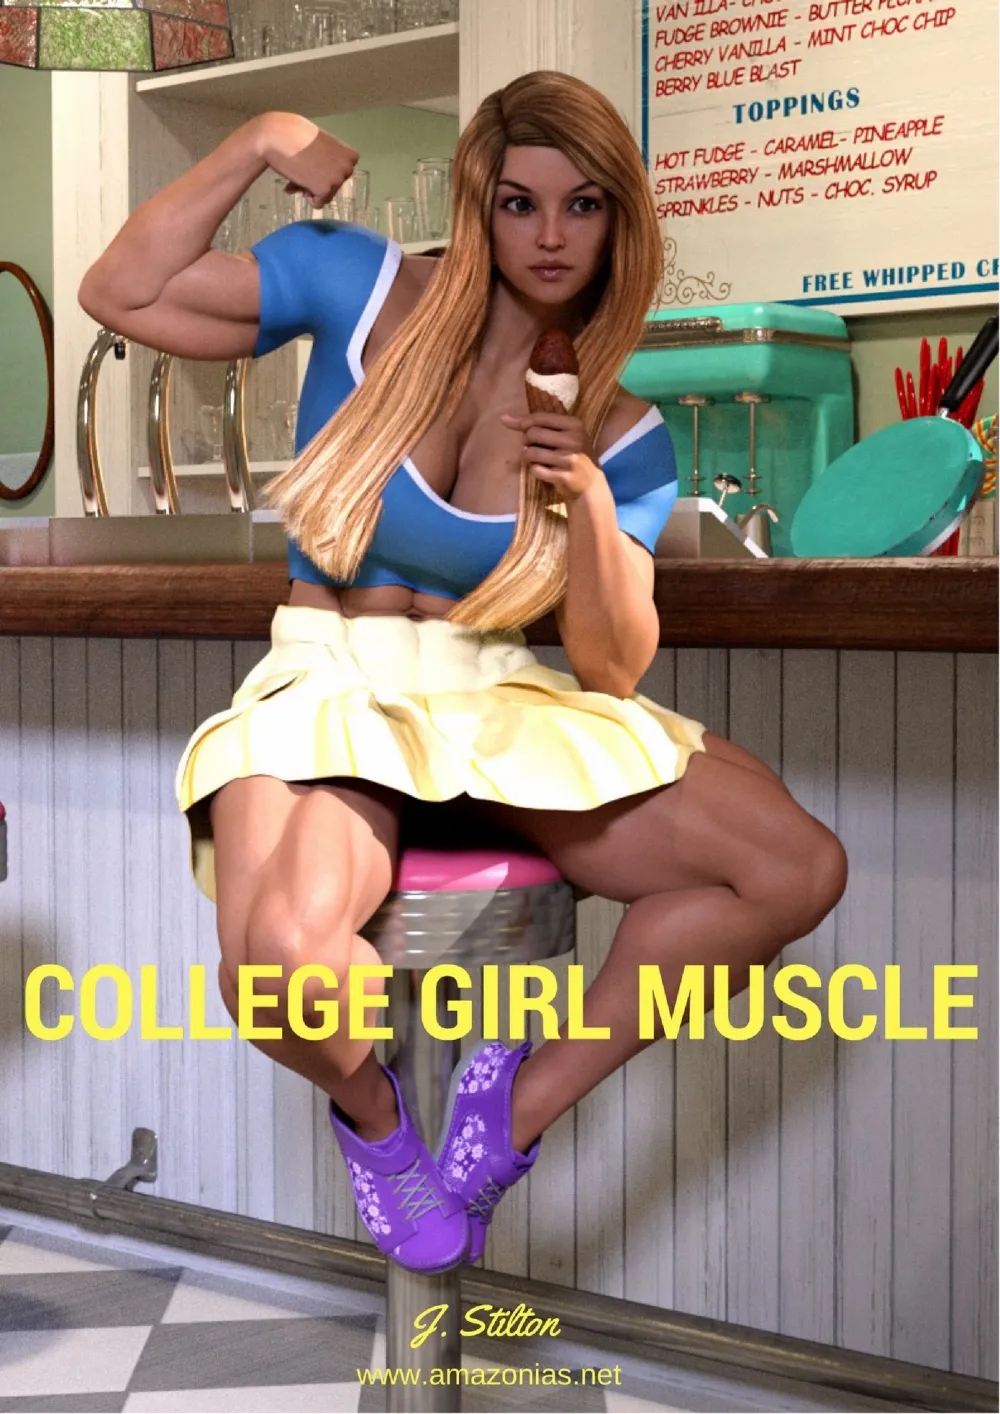 College Girl Muscle - Page 1